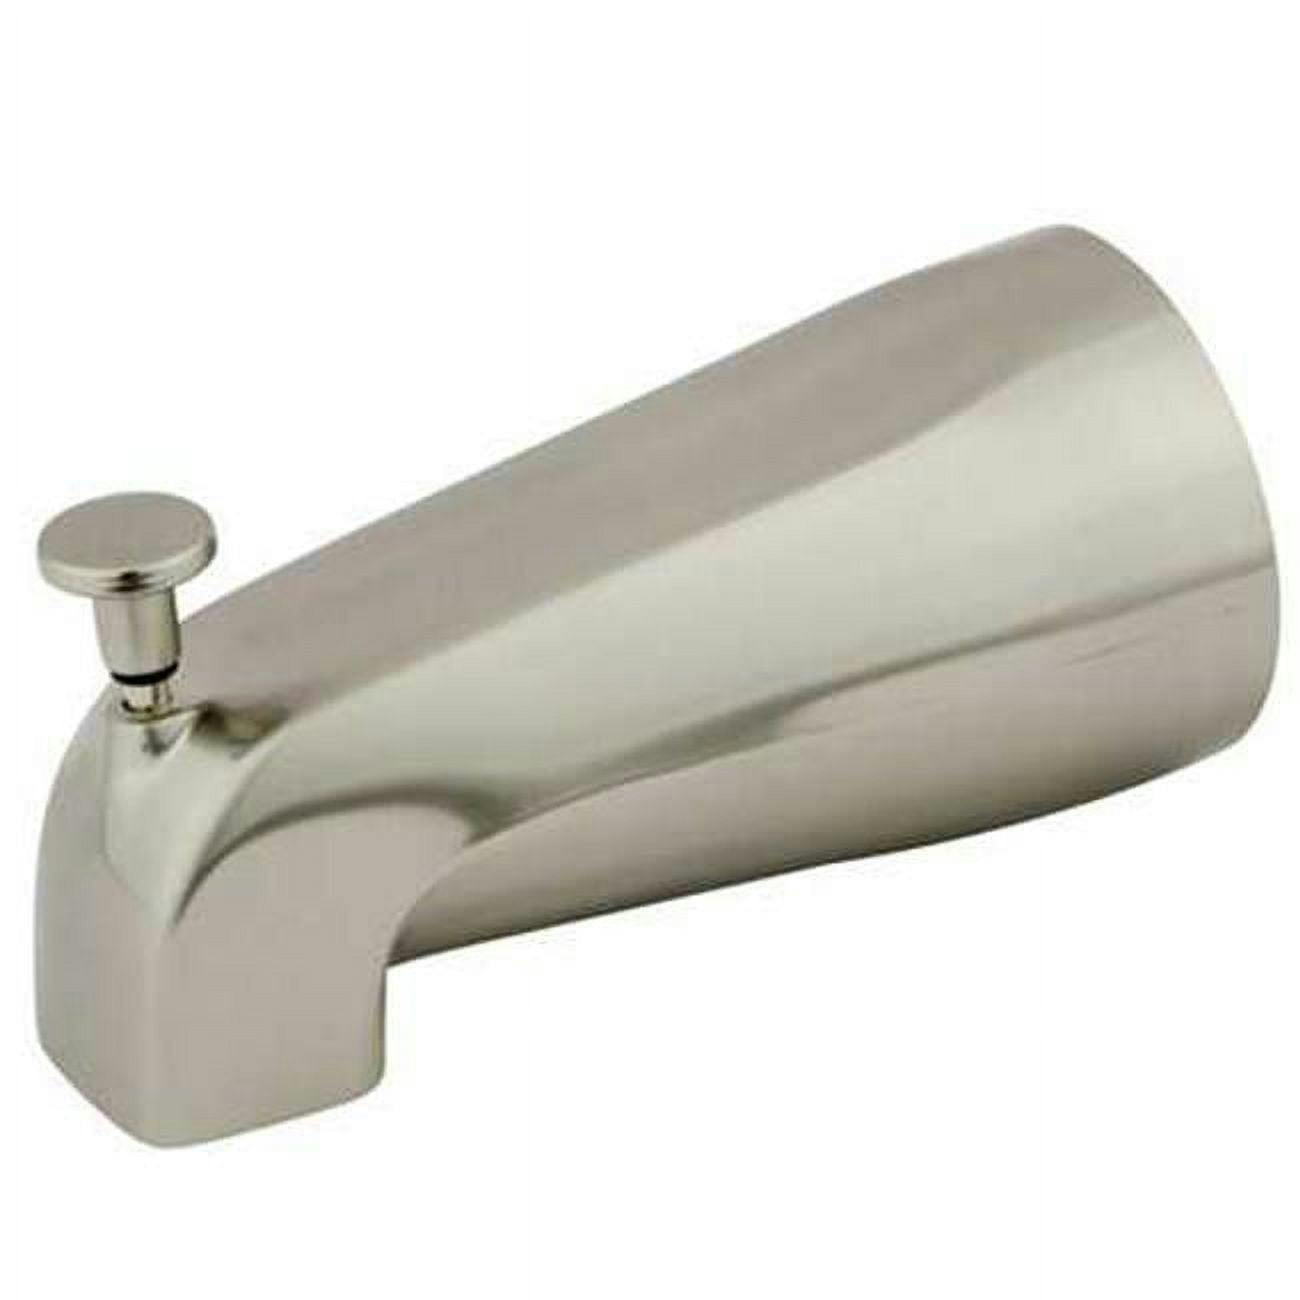 Taiwanese Traditional Brushed Nickel Wall-Mounted Tub Spout with Diverter